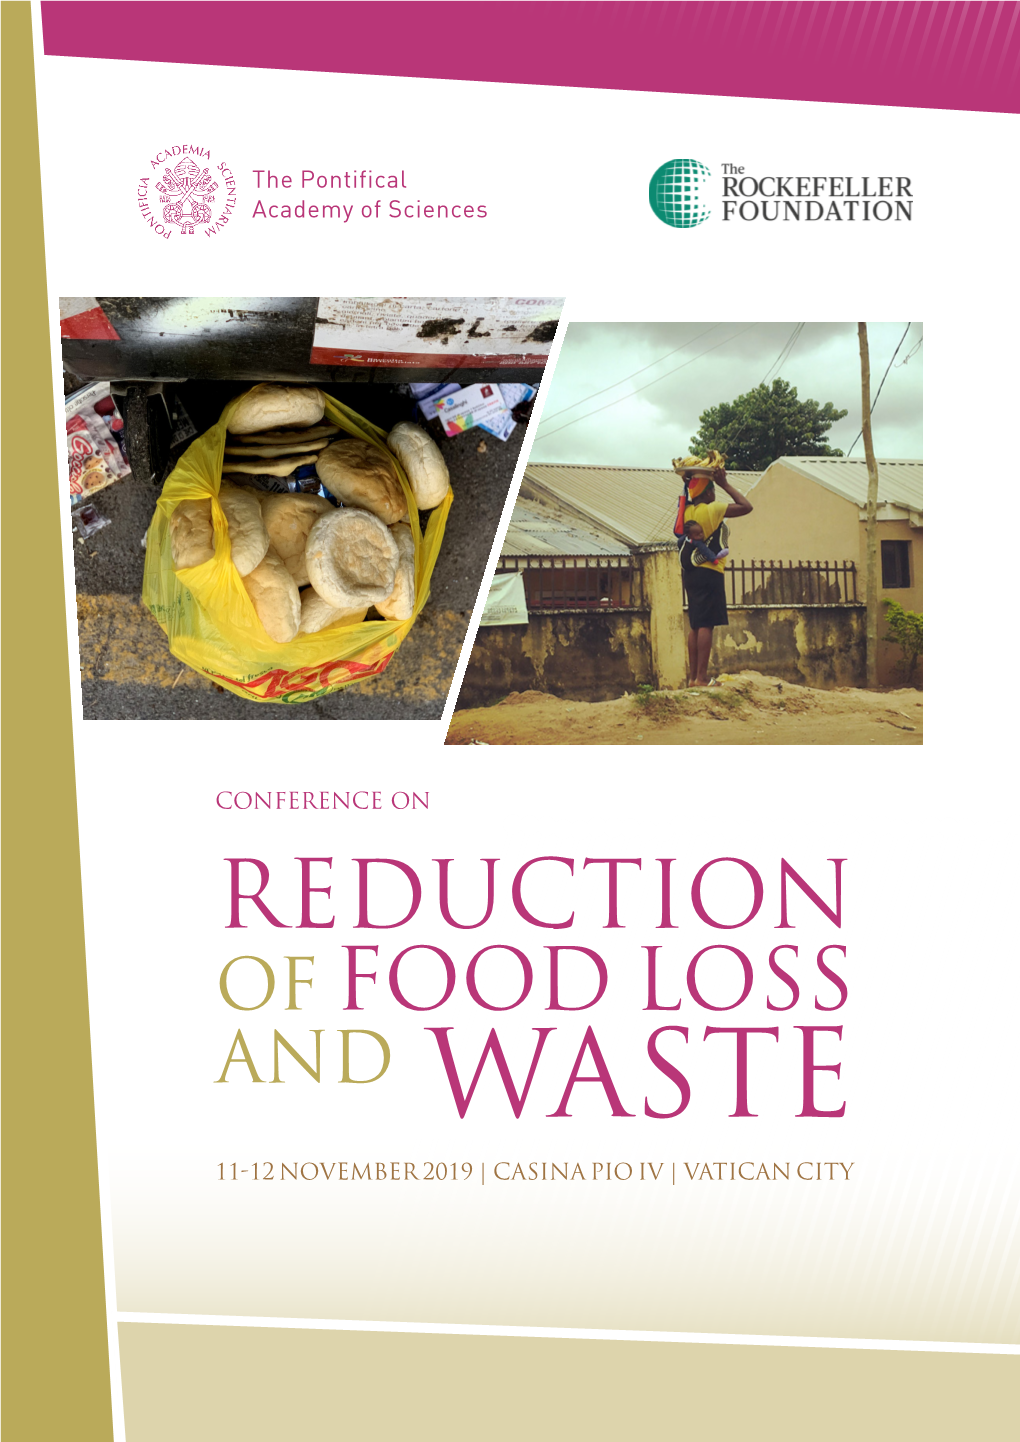 REDUCTION of FOOD LOSS and WASTE 11-12 NOVEMBER 2019 | CASINA PIO IV | VATICAN CITY Fighting Against the Terrible Scourge of Hunger Means Also Fighting Waste